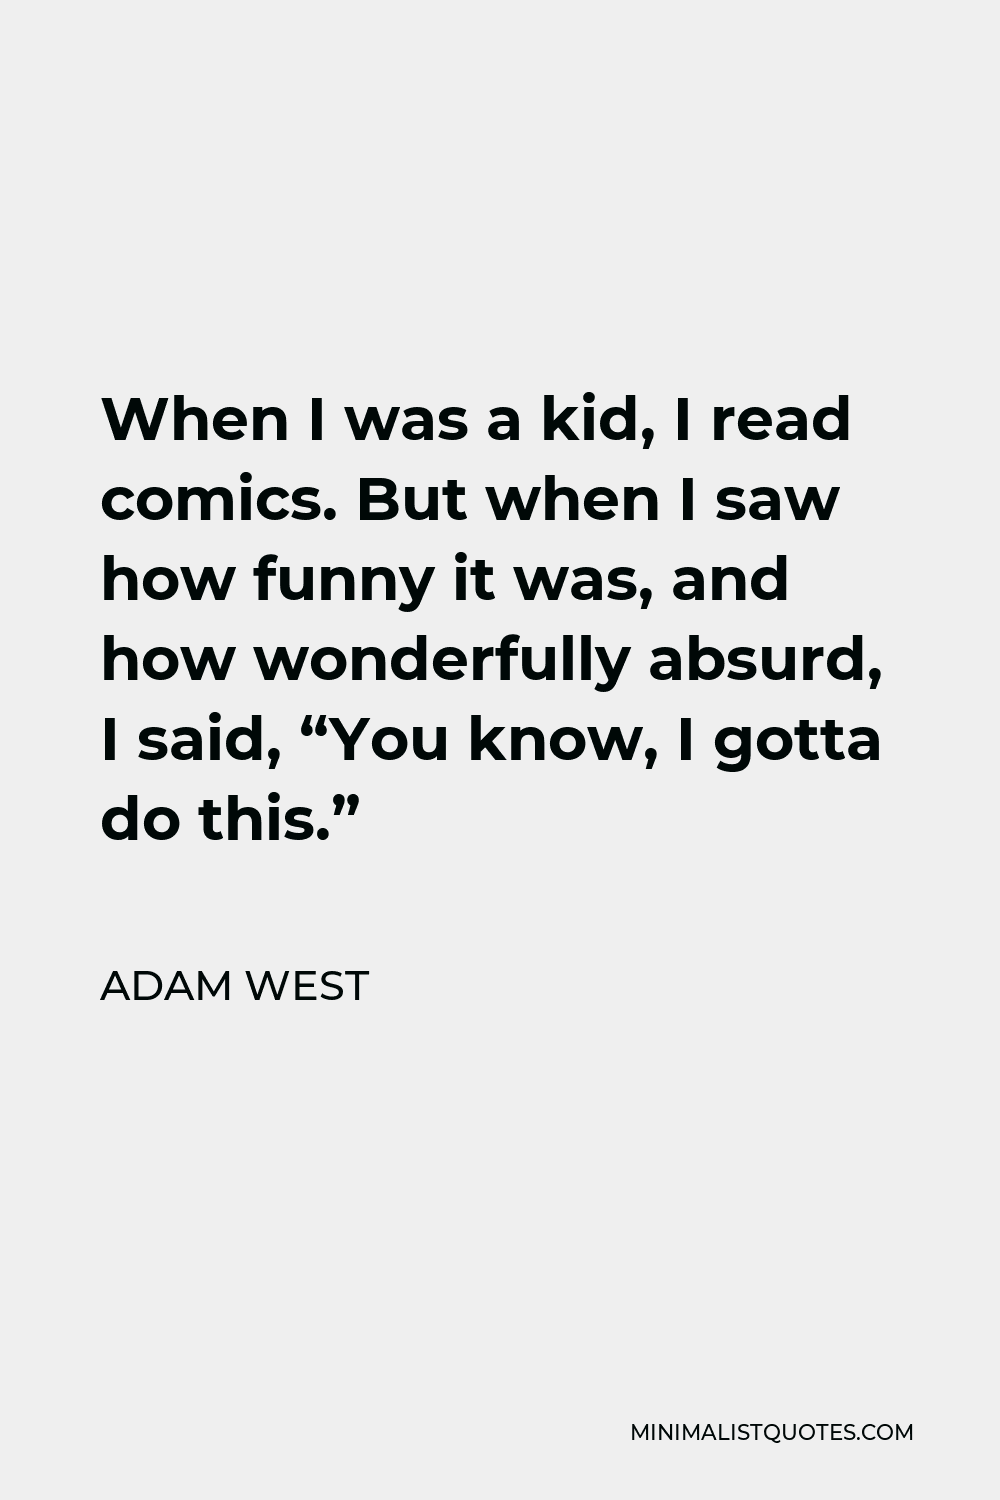 Adam West Quote - When I was a kid, I read comics. But when I saw how funny it was, and how wonderfully absurd, I said, “You know, I gotta do this.”